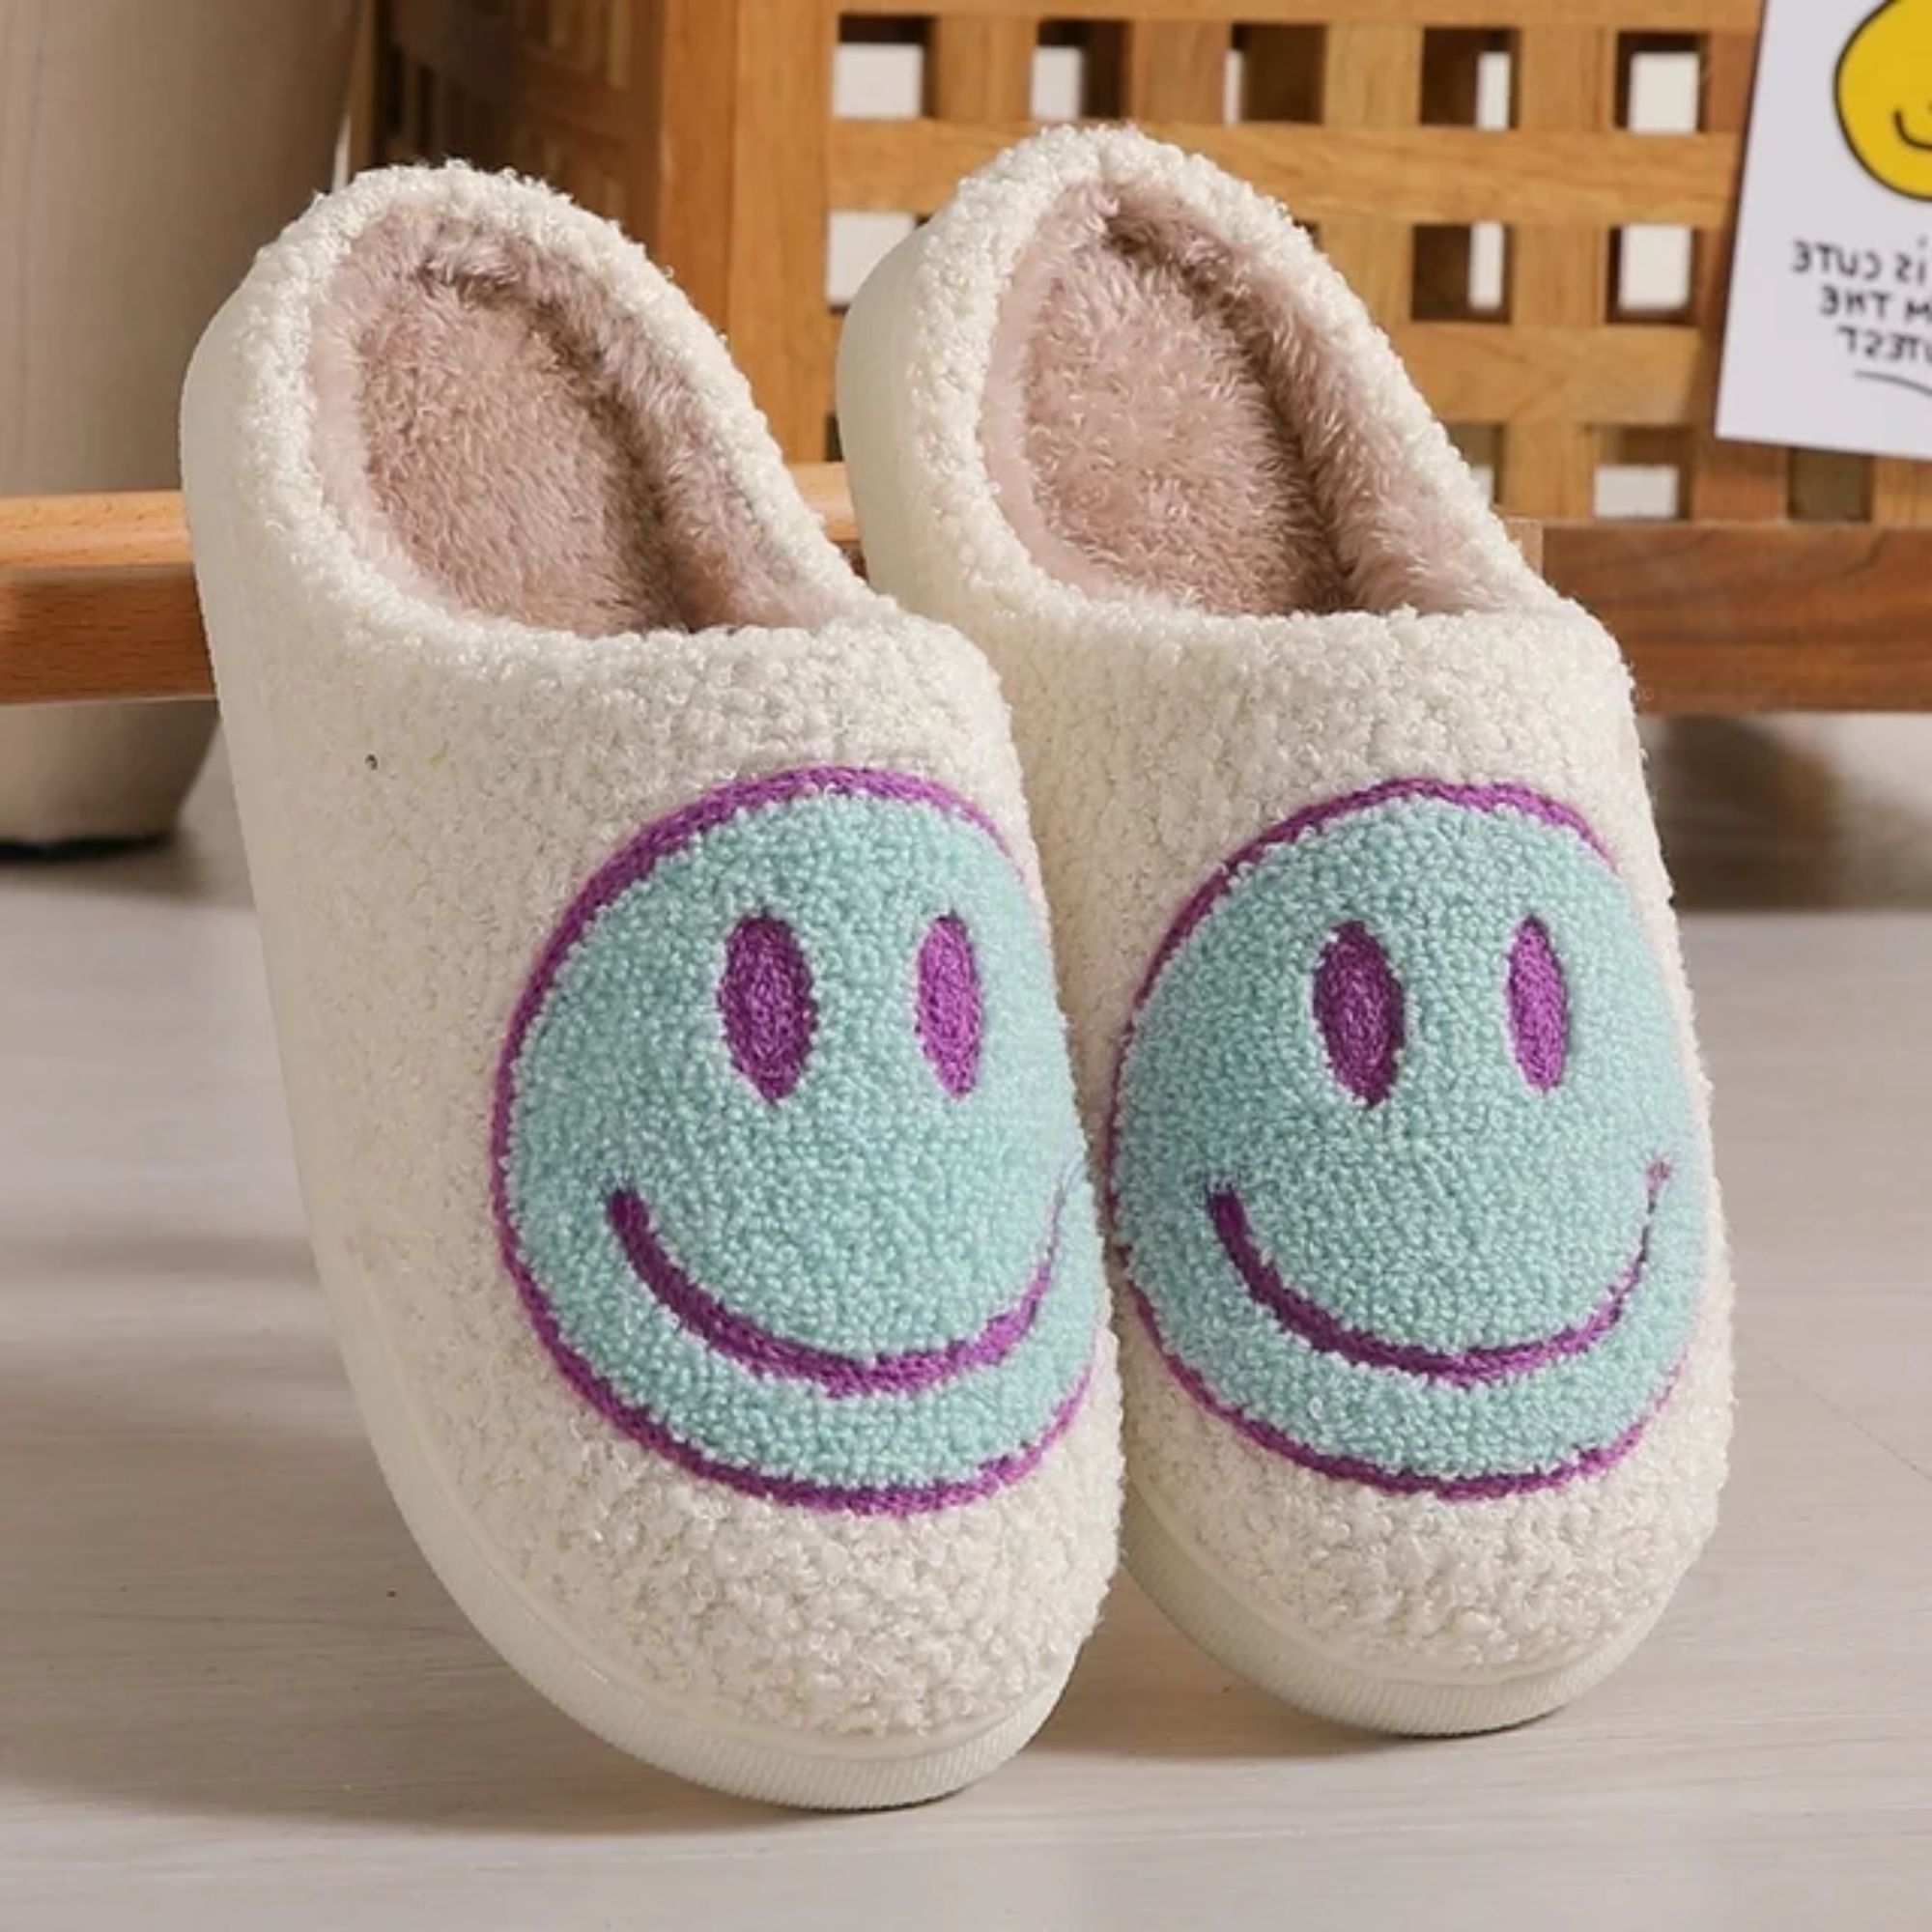 BERANMEY Cute Smile Face Slippers for Women Perfect Soft Plush Comfy Warm Slip-On Happy Face Slippers fo Women Indoor fluffy Smile House Slippers for Women and Men Non-slip Fuzzy Flat Slides - image 3 of 8